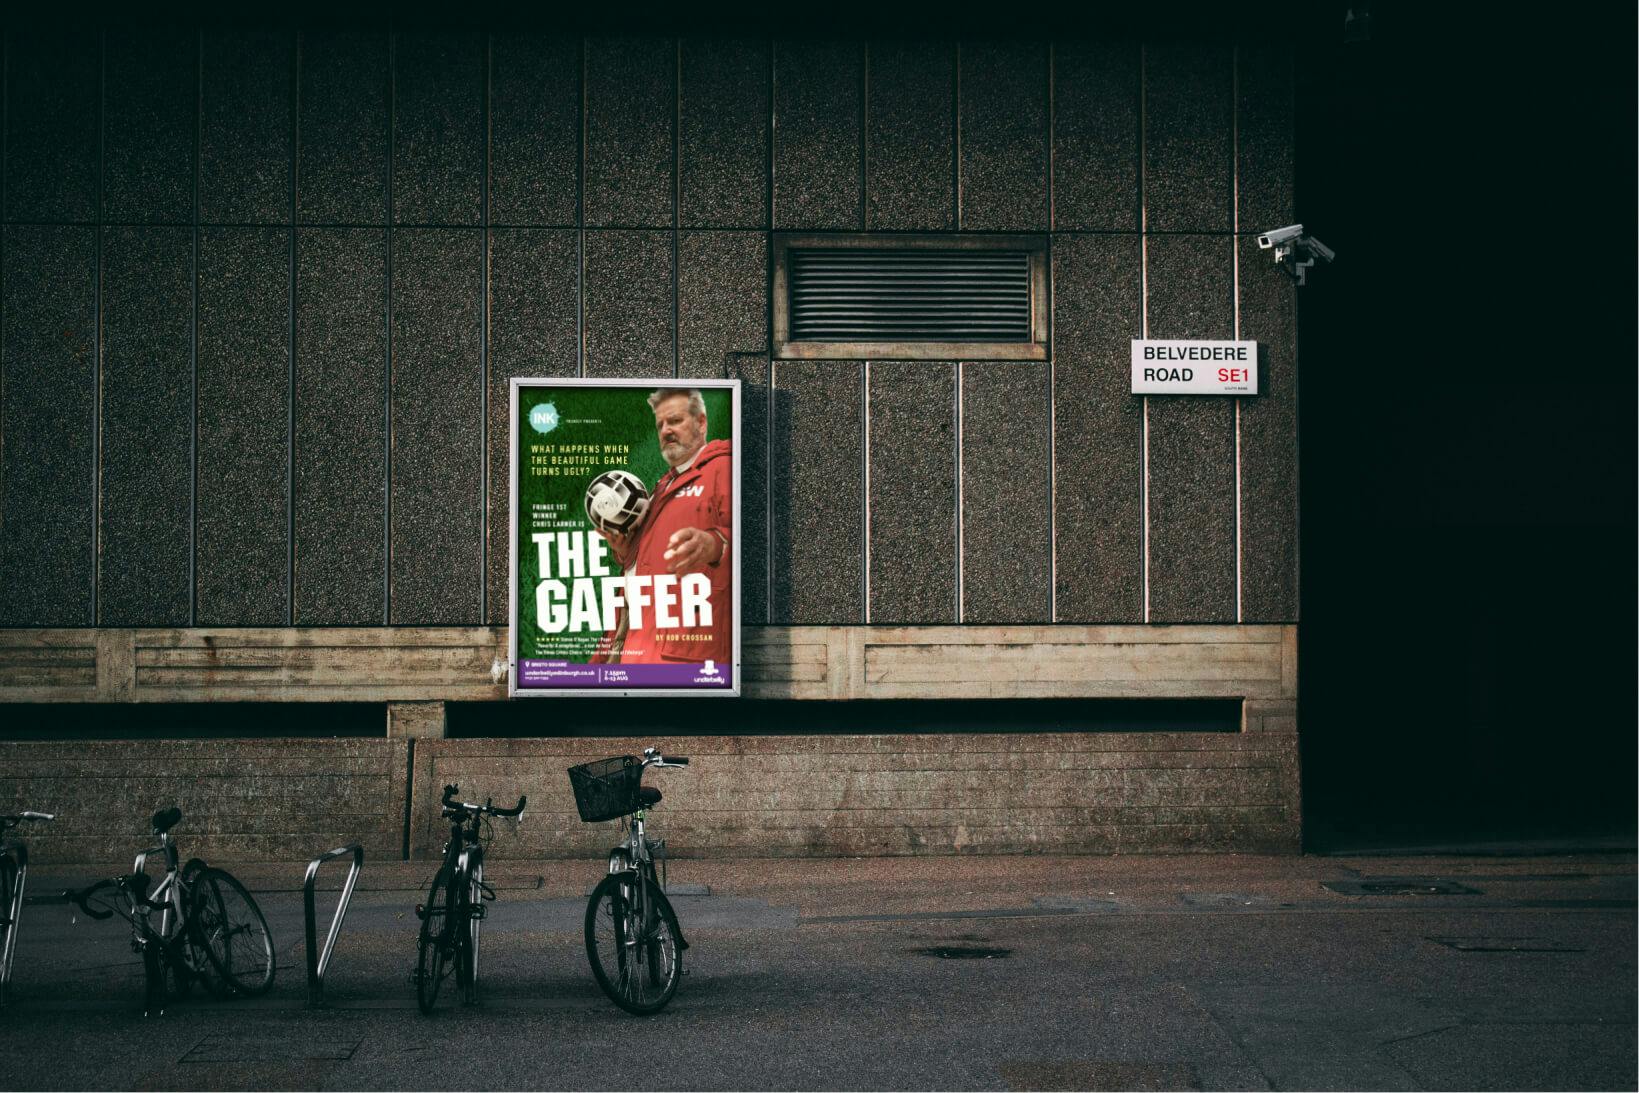 The Gaffer poster in the street